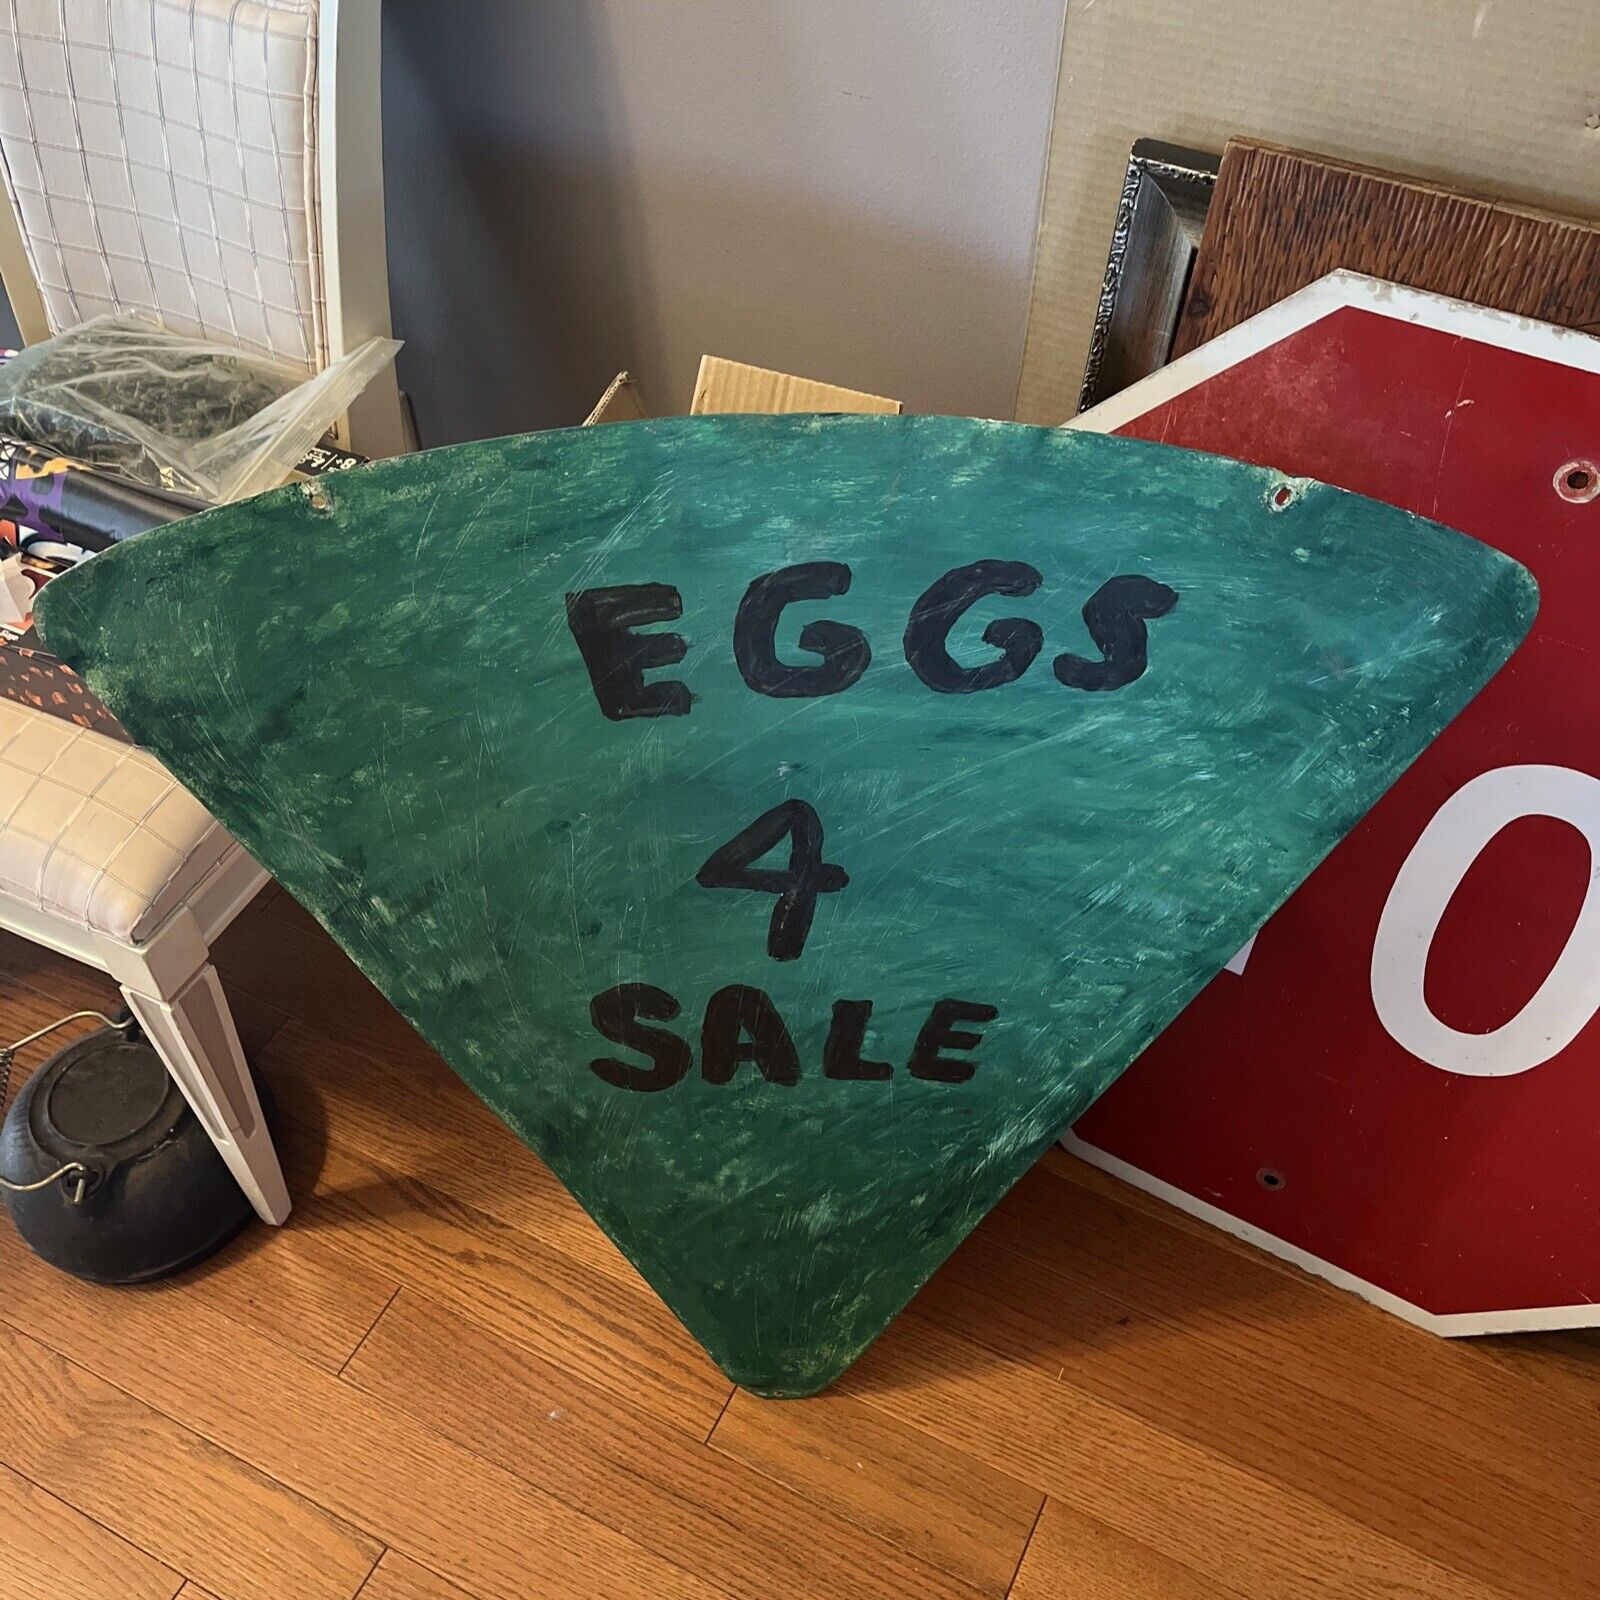 eggs for sale sign Vintage , Read) This Is An Original Oilzum Sign, Double Sided